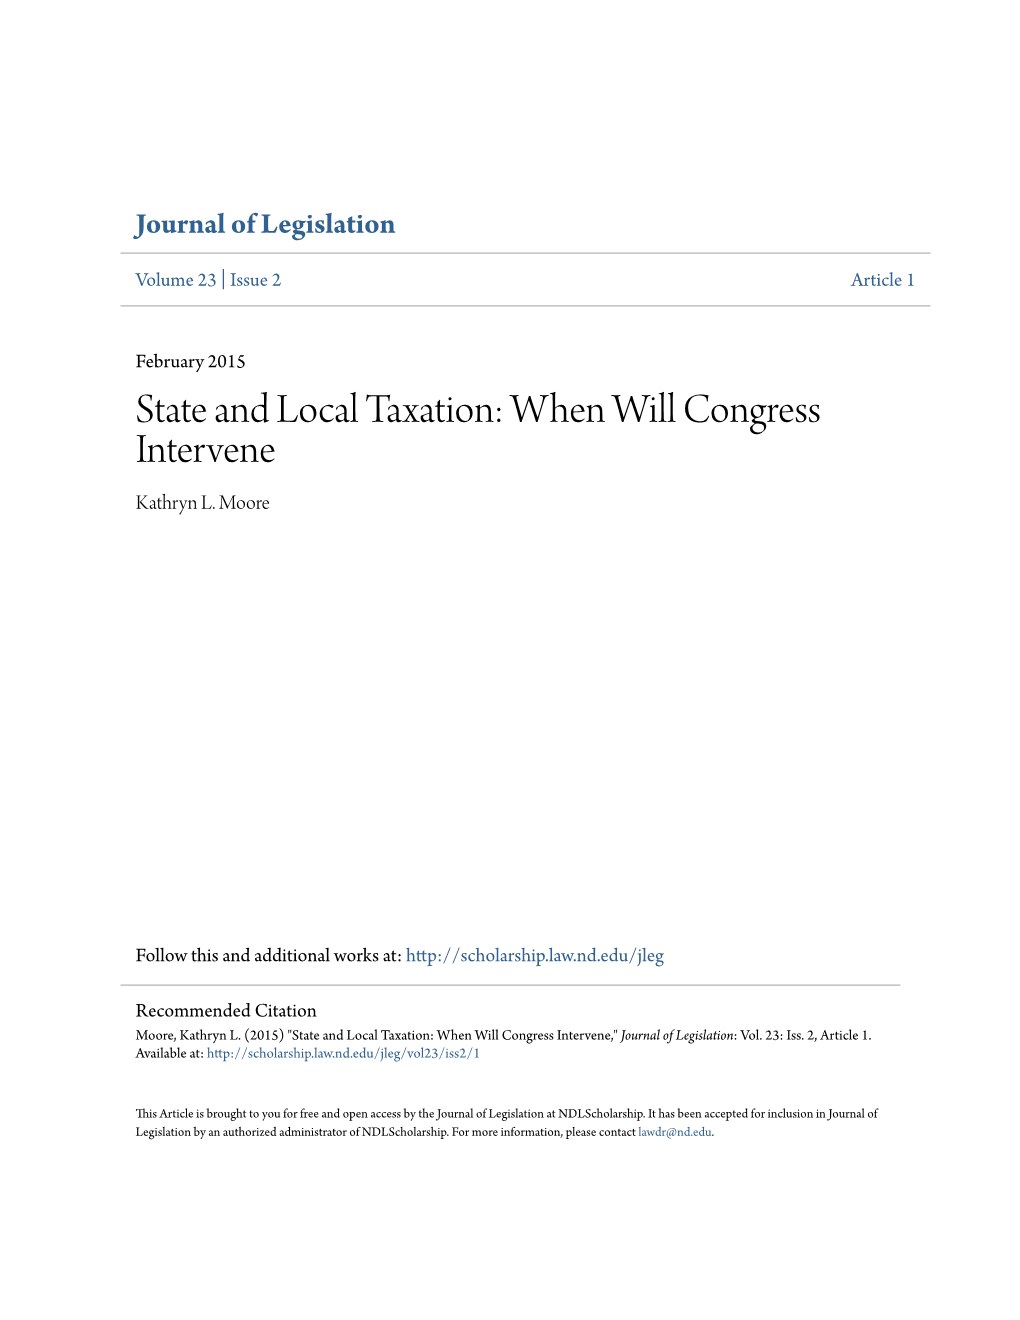 State and Local Taxation: When Will Congress Intervene Kathryn L